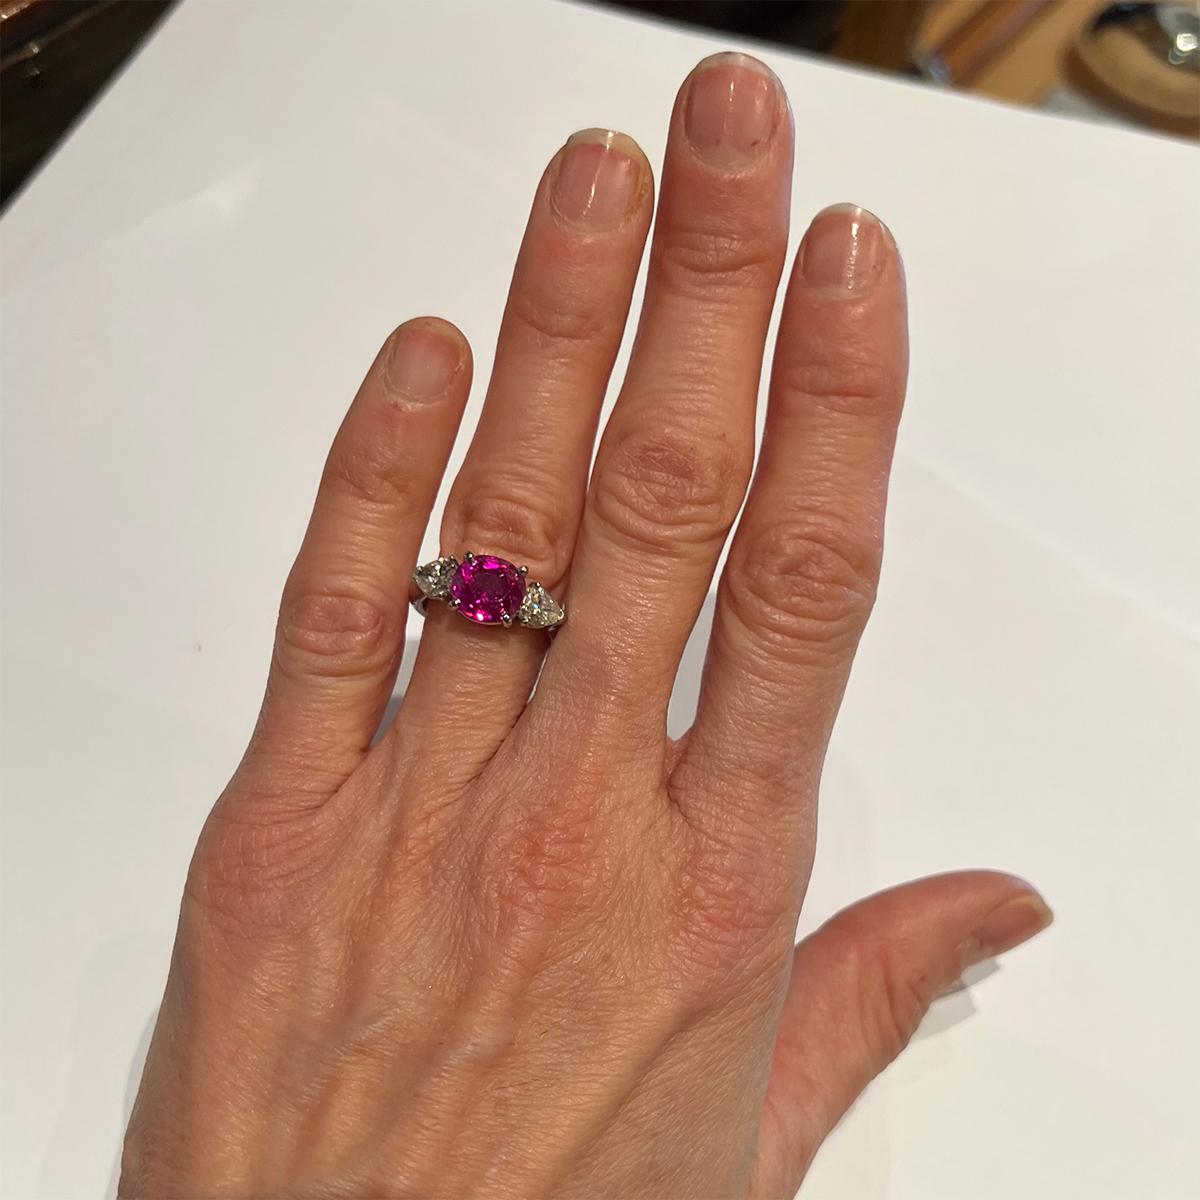 Ruby and diamond three-stone ring, centering an oval, mixed-cut natural Burmese ruby weighing 3.76 carats flanked by two pear-shaped diamonds totaling approximately 2.50 carats. Handmade platinum mounting with 14kt white gold shank marked 